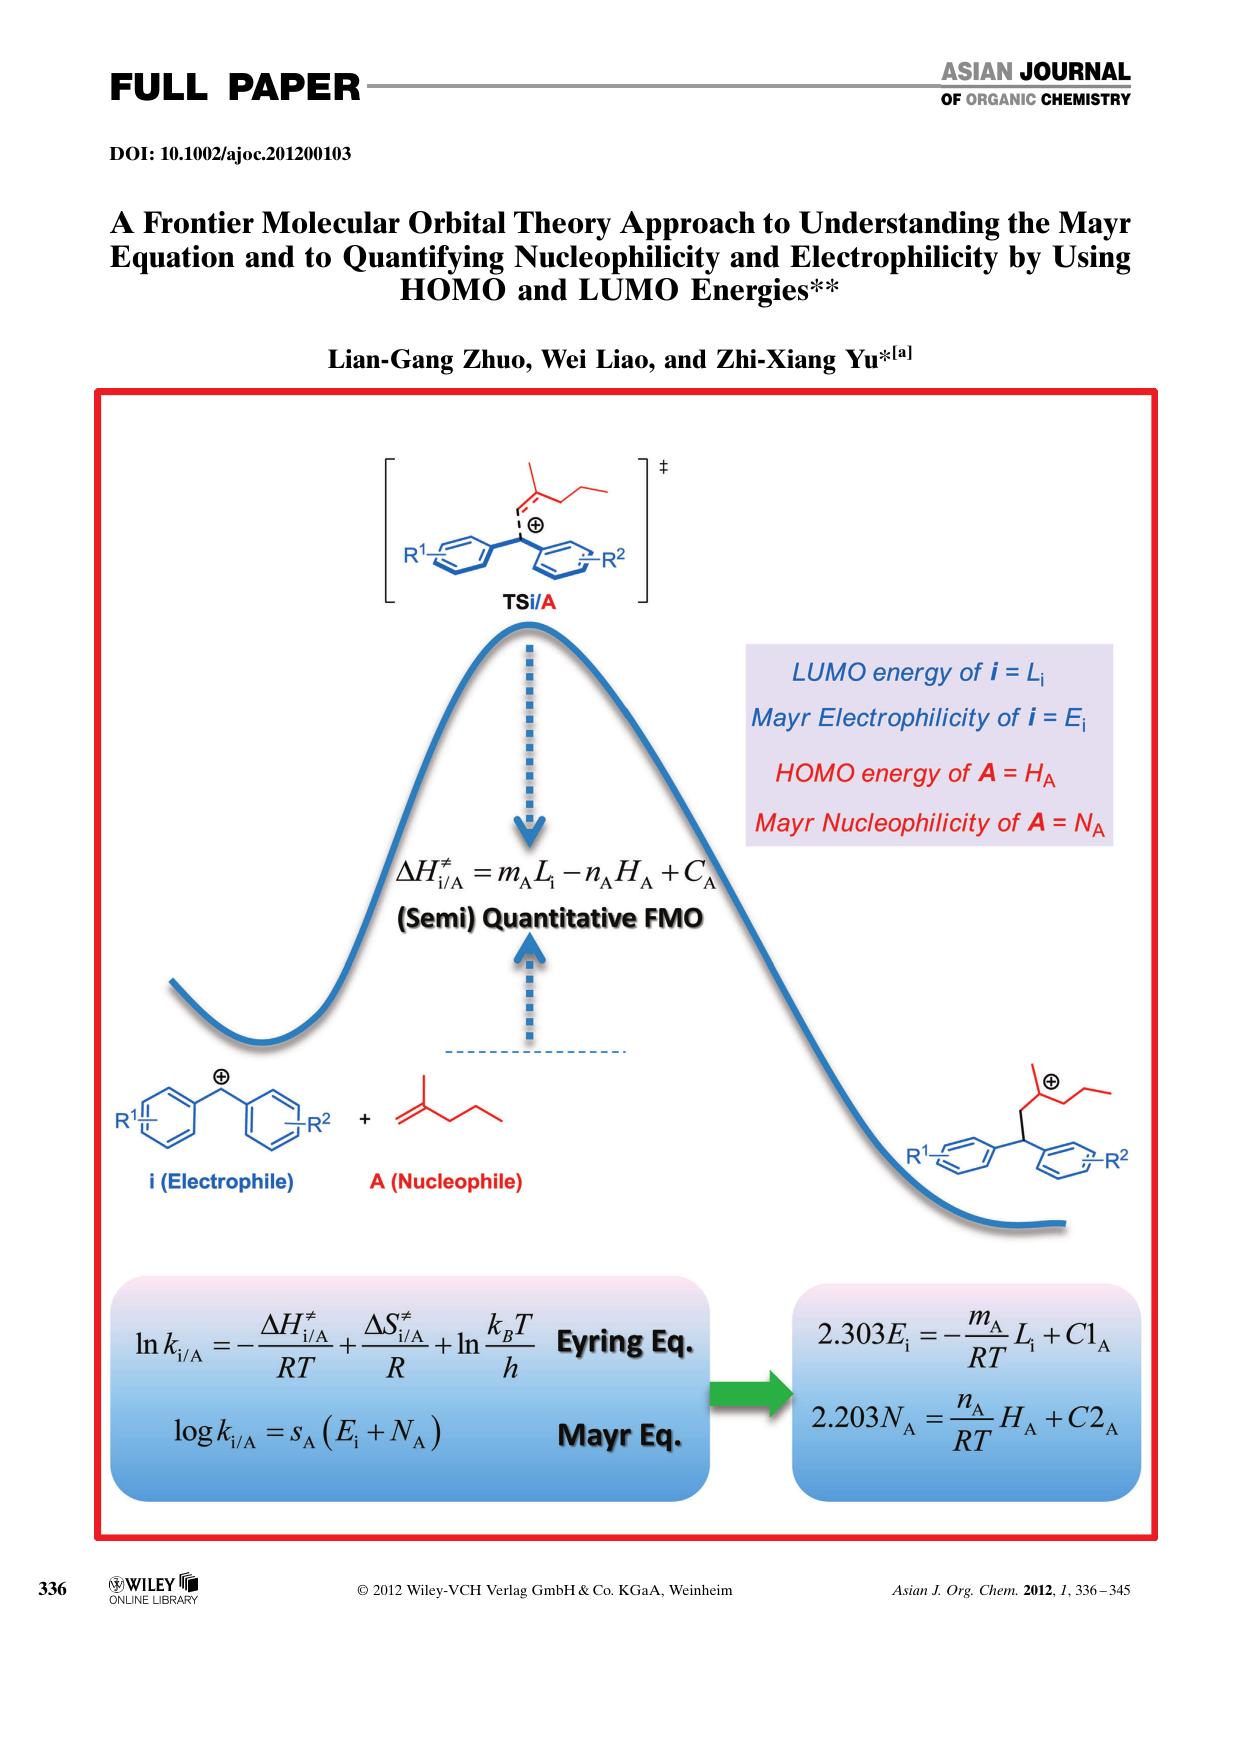 A Frontier Molecular Orbital Theory Approach to Understanding the Mayr Equation and to Quantifying Nucleophilicity and Electrophilicity by Using HOMO and LUMO Energies by Unknown